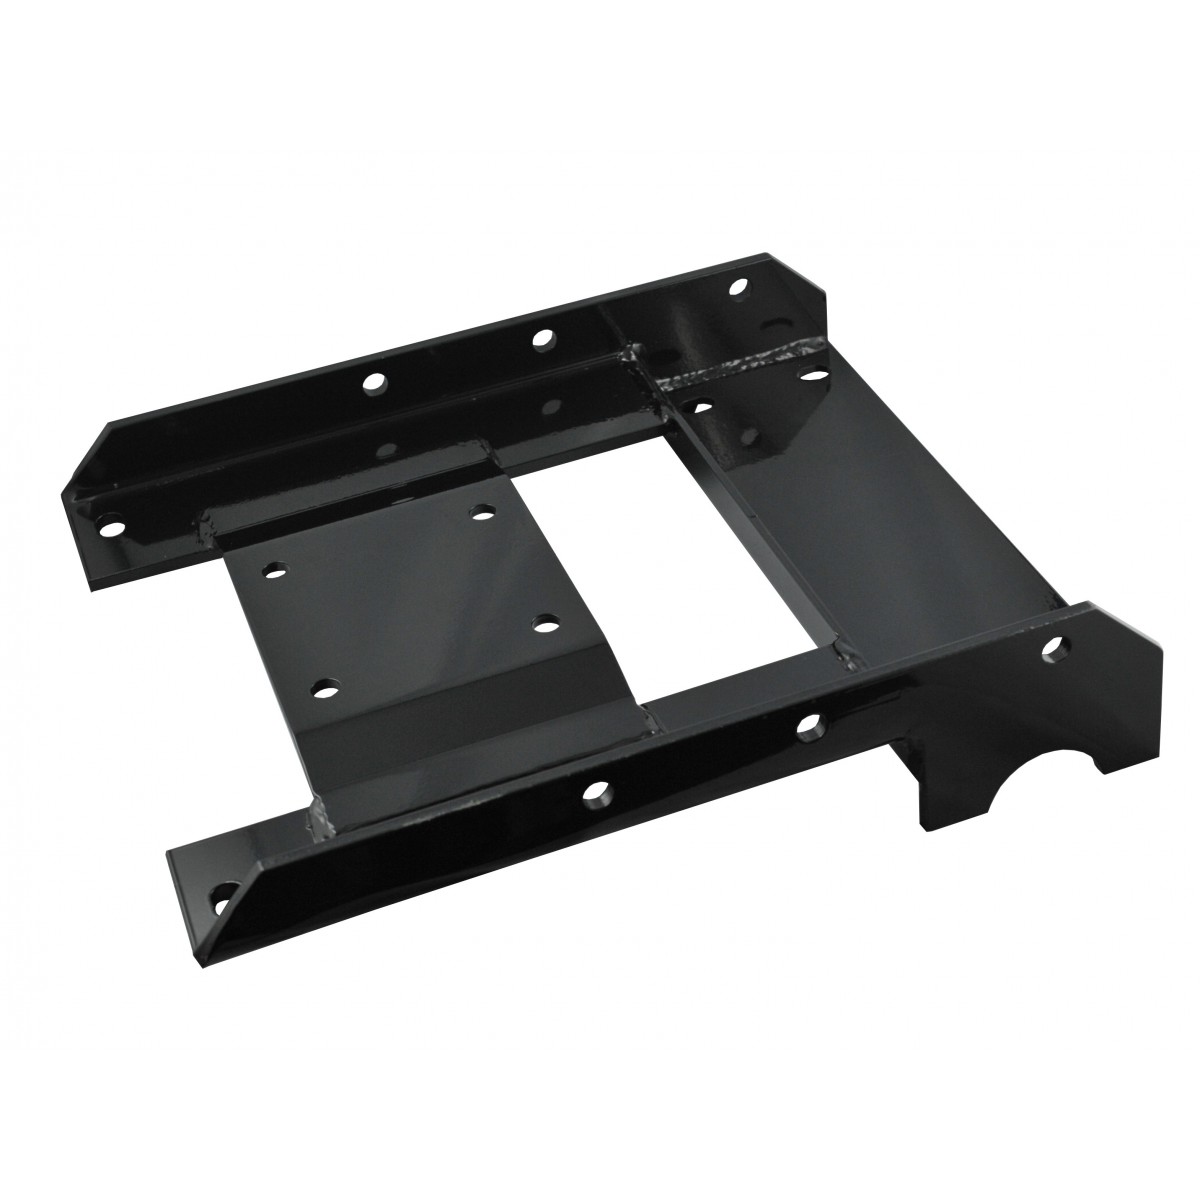 Frame, base, gearbox mounting plate for SB MZ cultivator